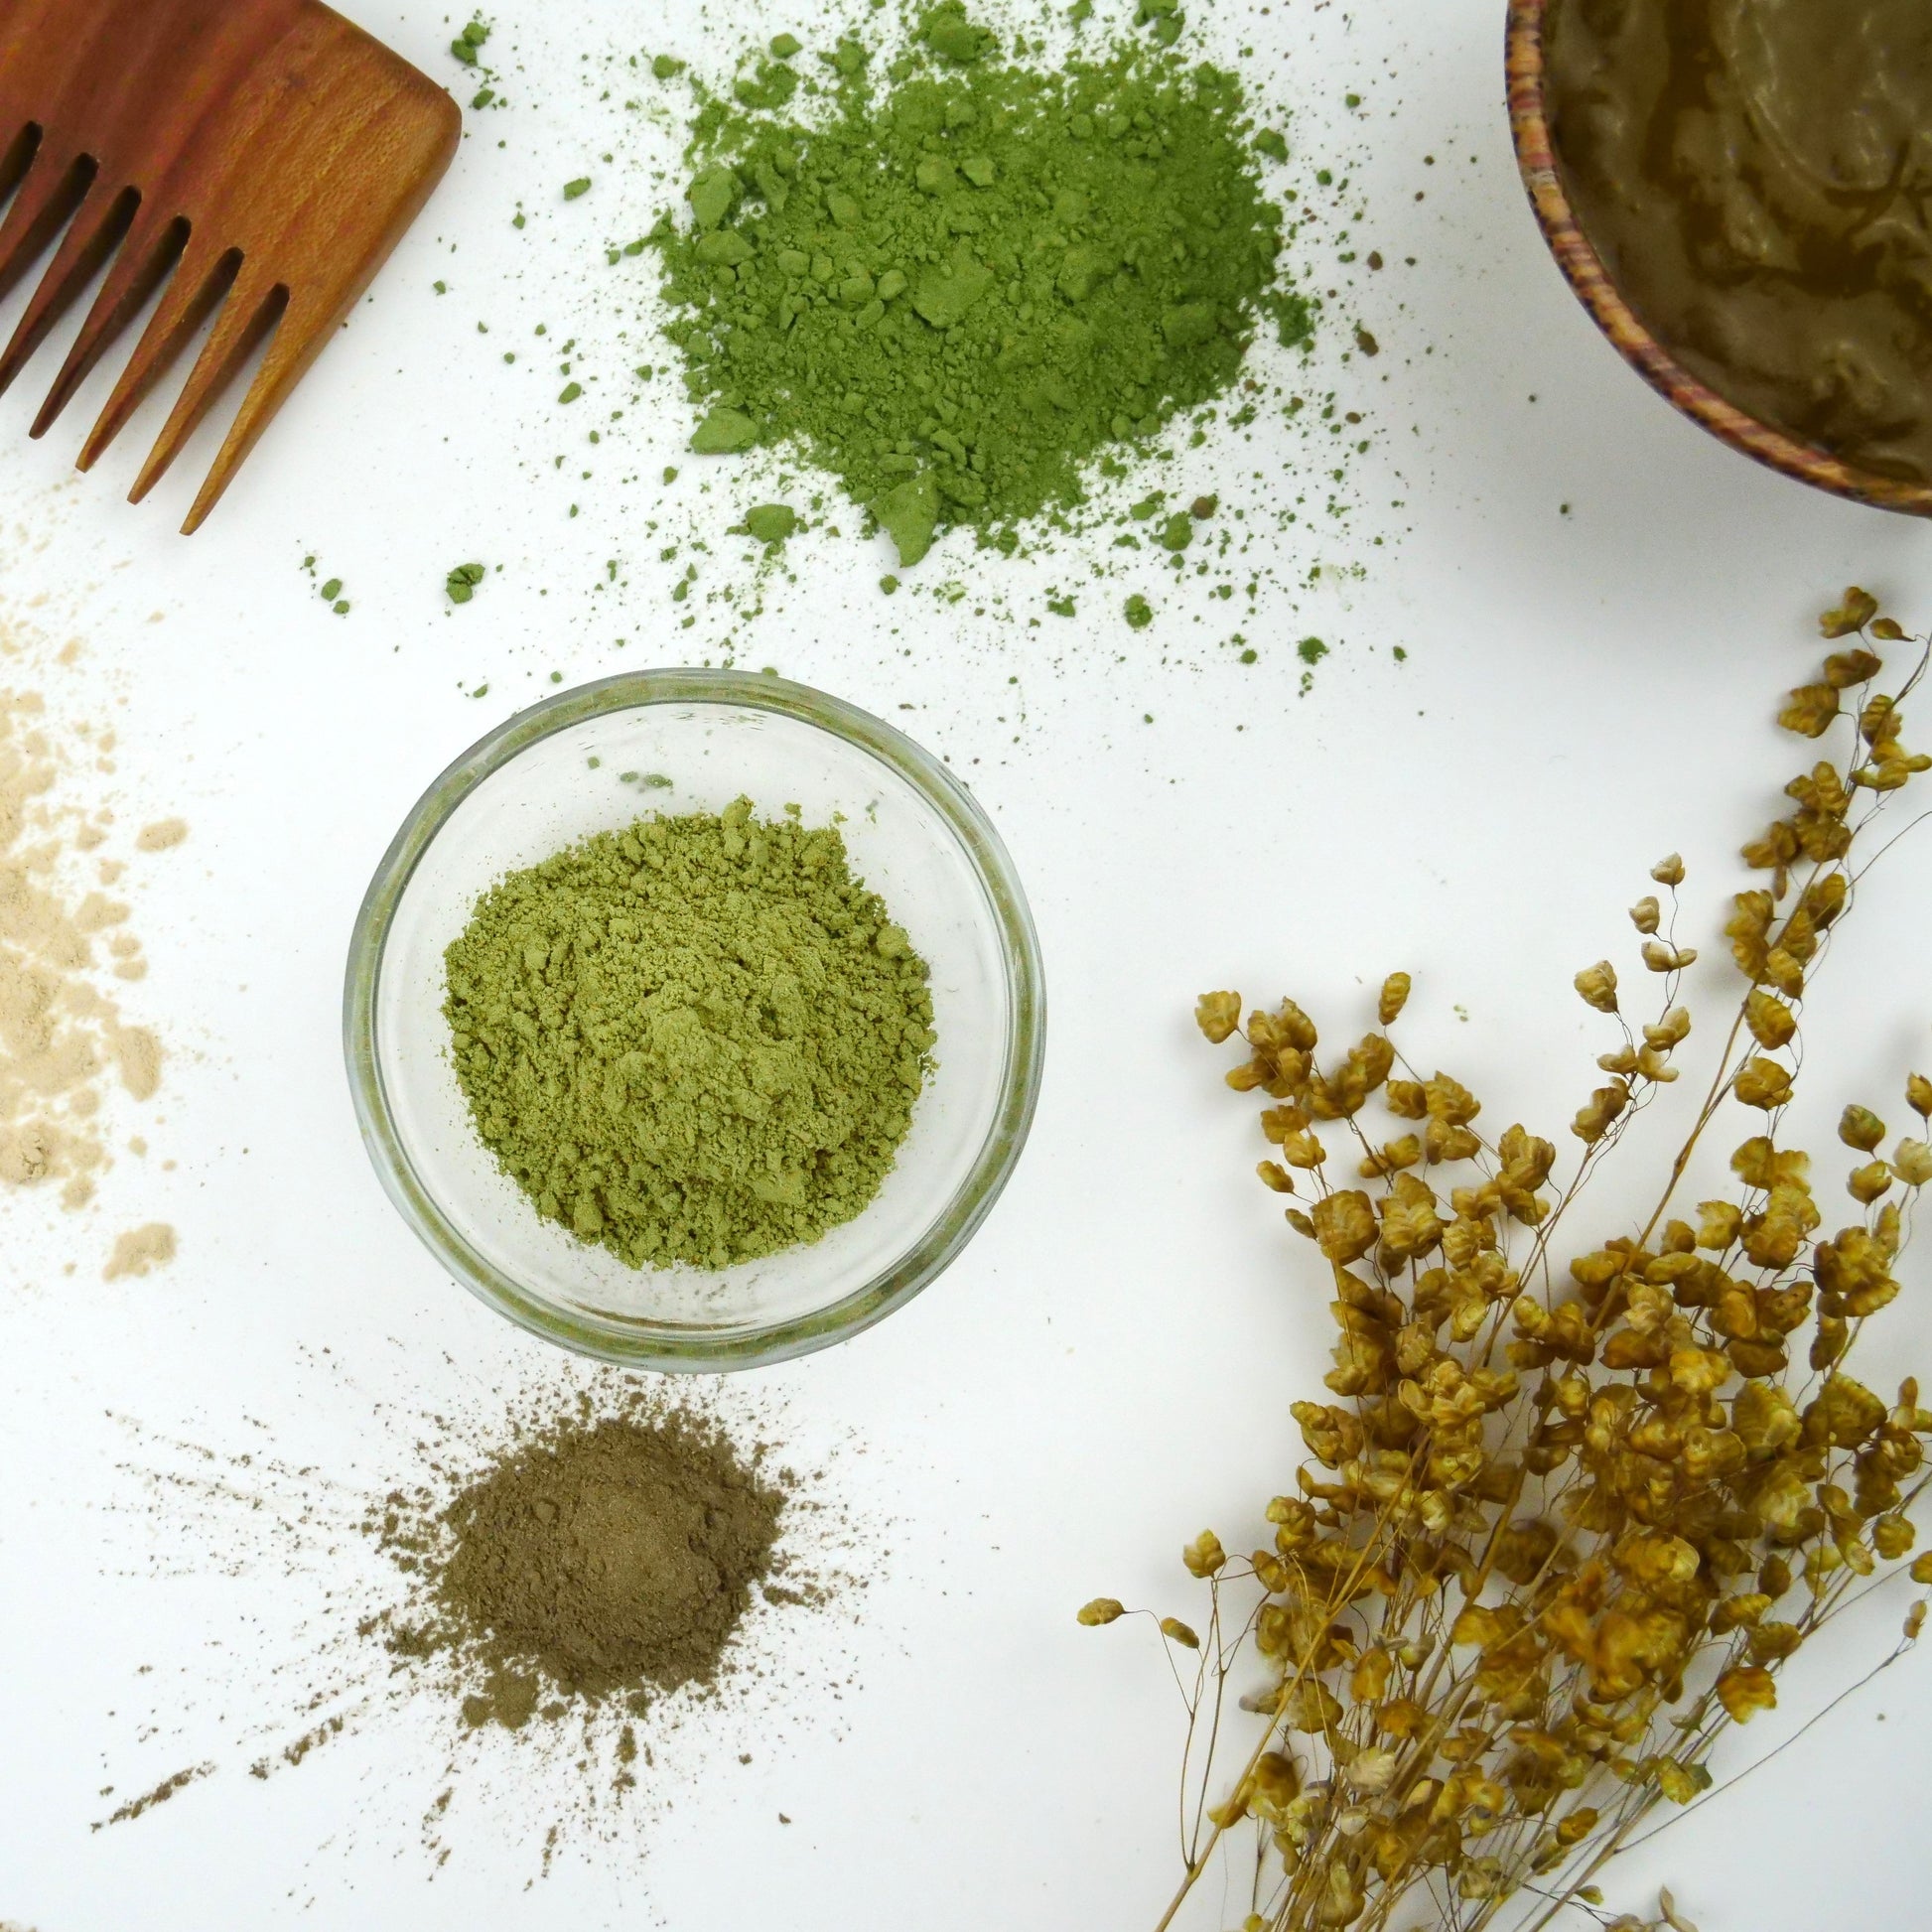 flat lay of ingredients used in it's pure natural henna hair dye. on a white background you can see bright green powders on the table and in a glass bowl, a wooden comb and a dried flower frond. in the corner in a wooden bowl you can see the dye has been mixed with water to create a paste to apply to the hair